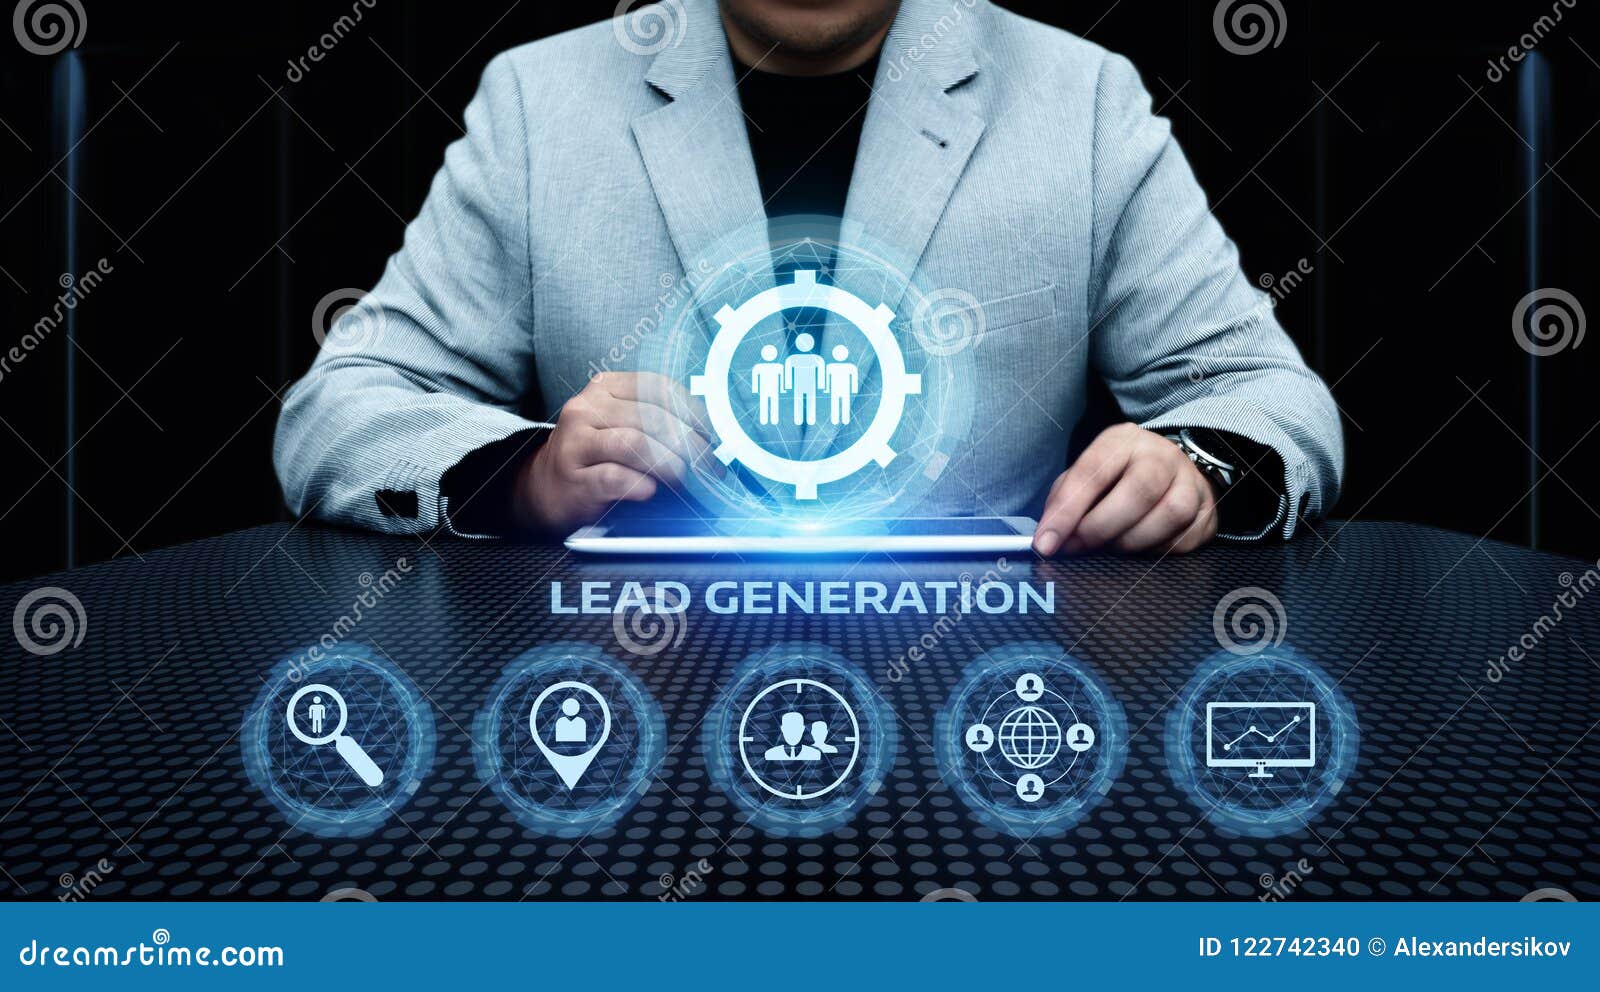 lead generation marketing advertising business internet technology concept